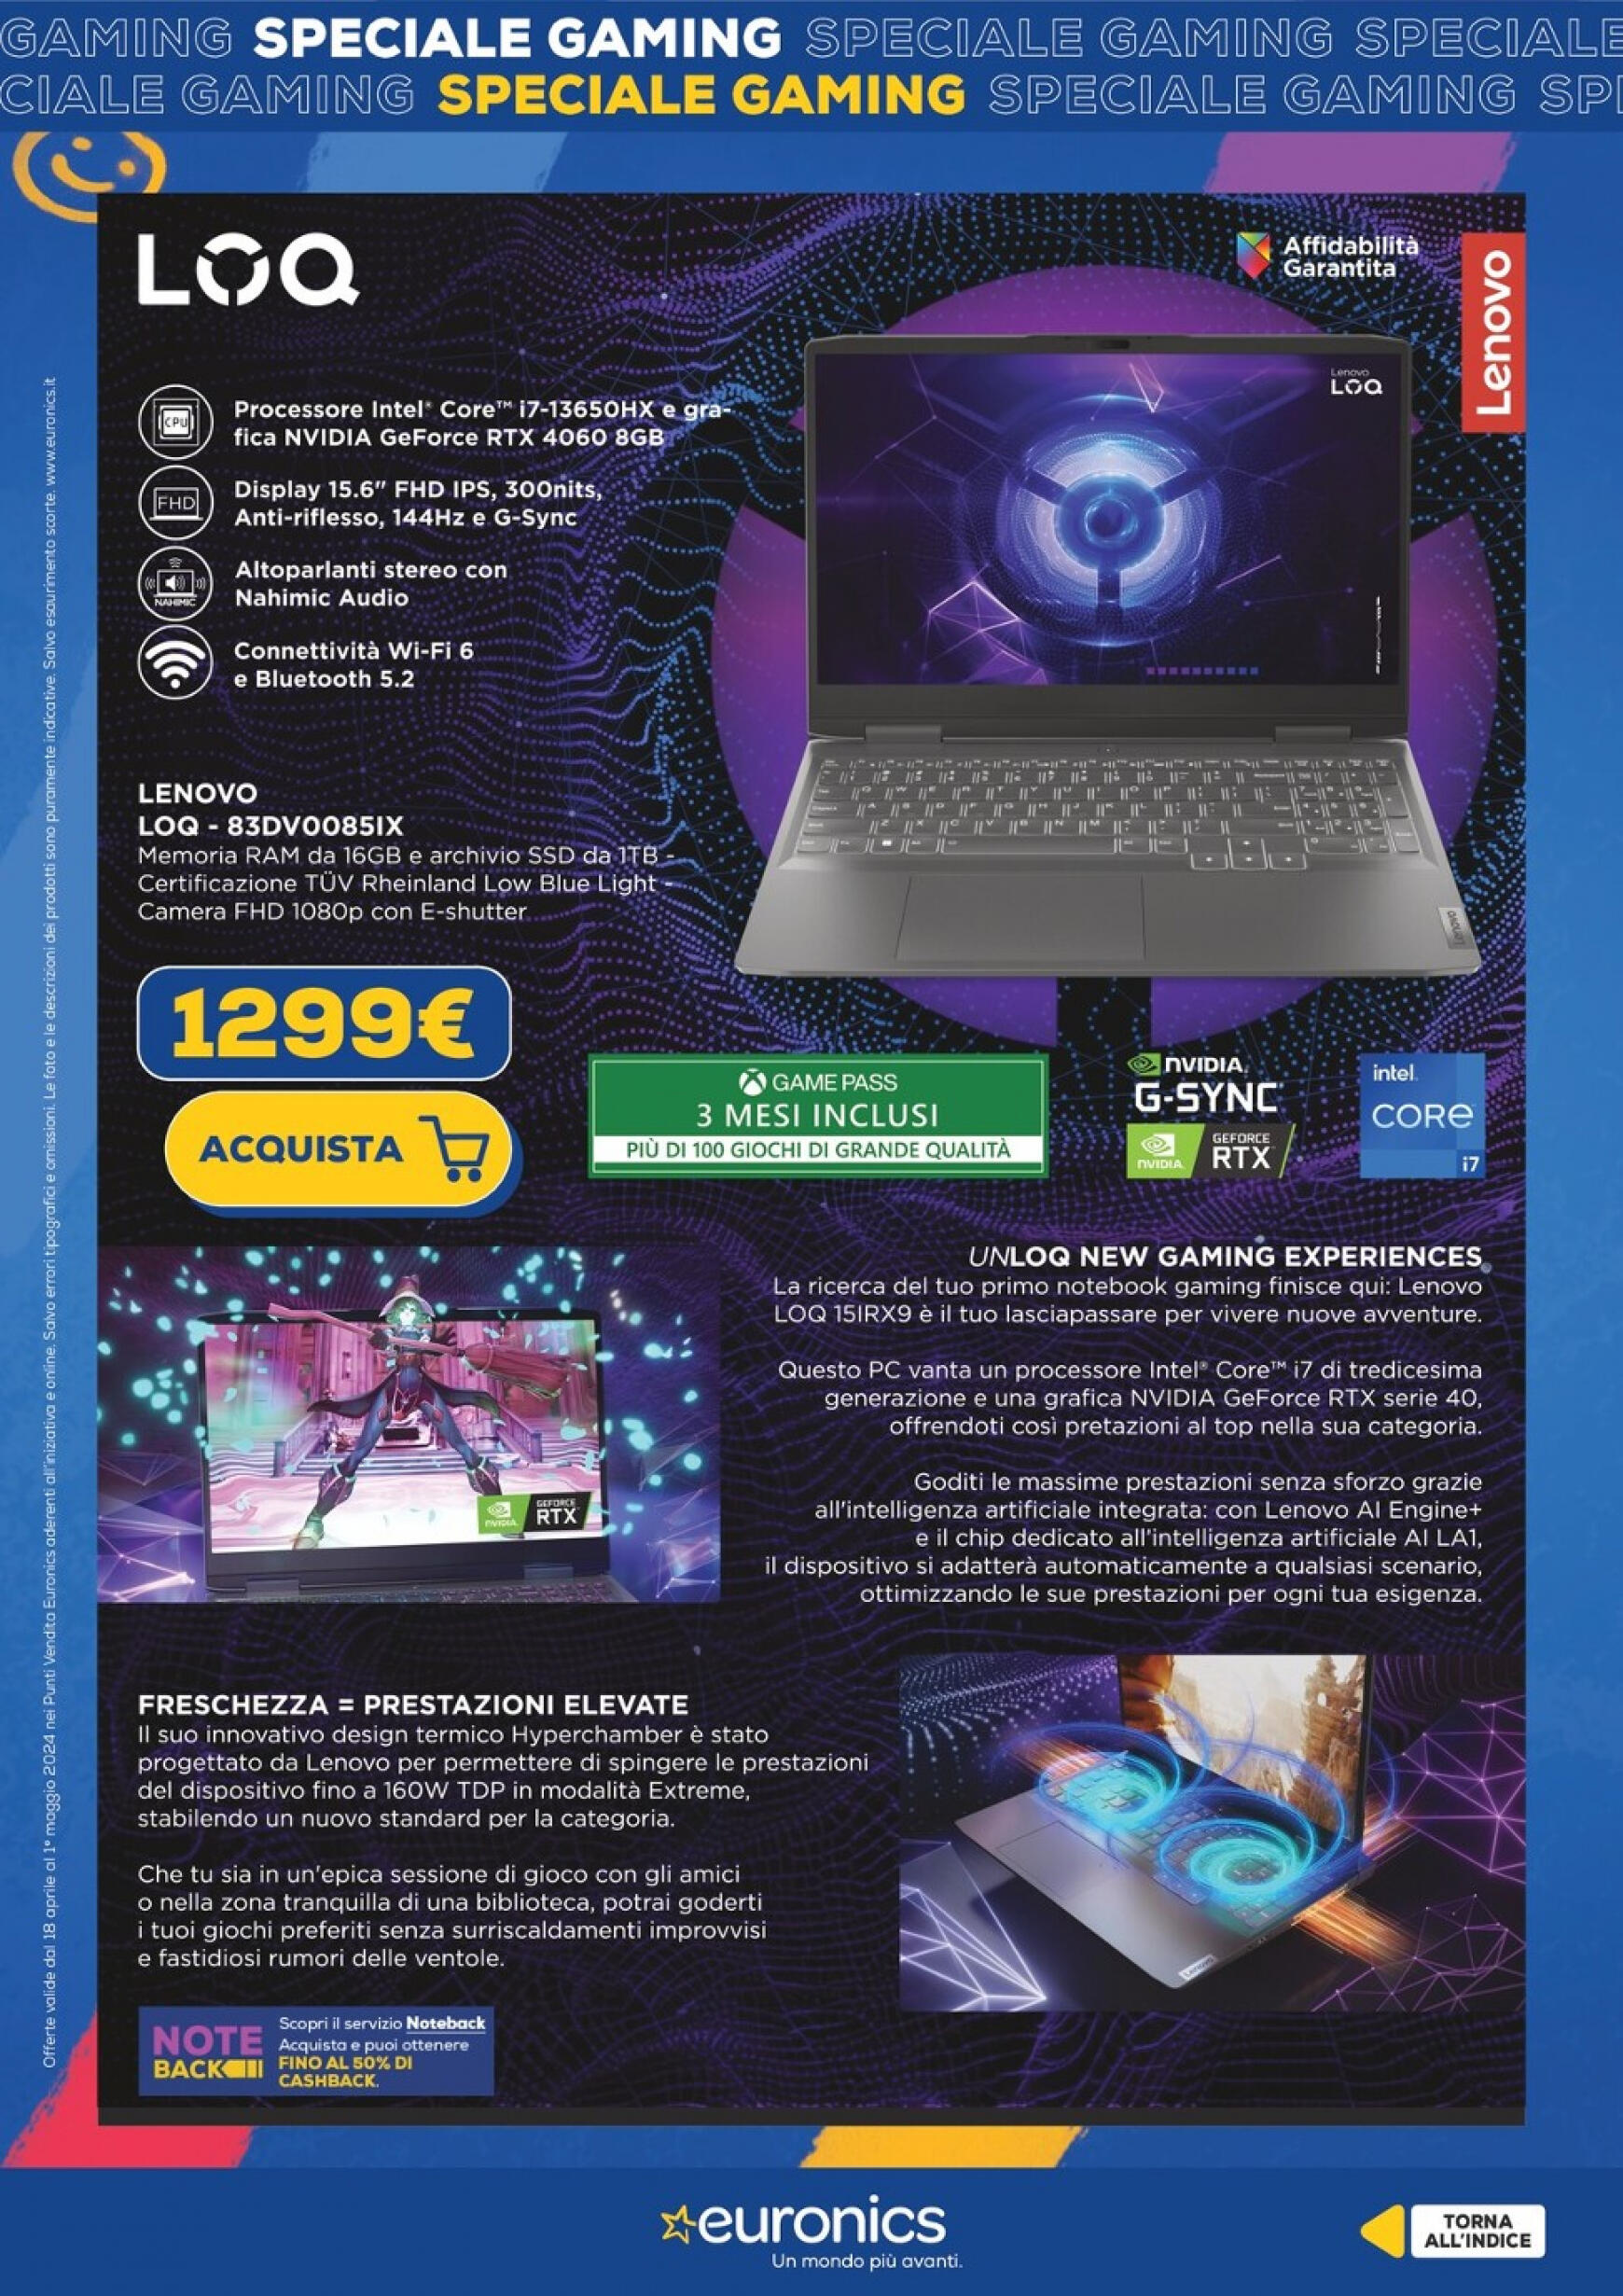 euronics - Nuovo volantino Euronics - Speciale Gaming 18.04. - 01.05. - page: 7